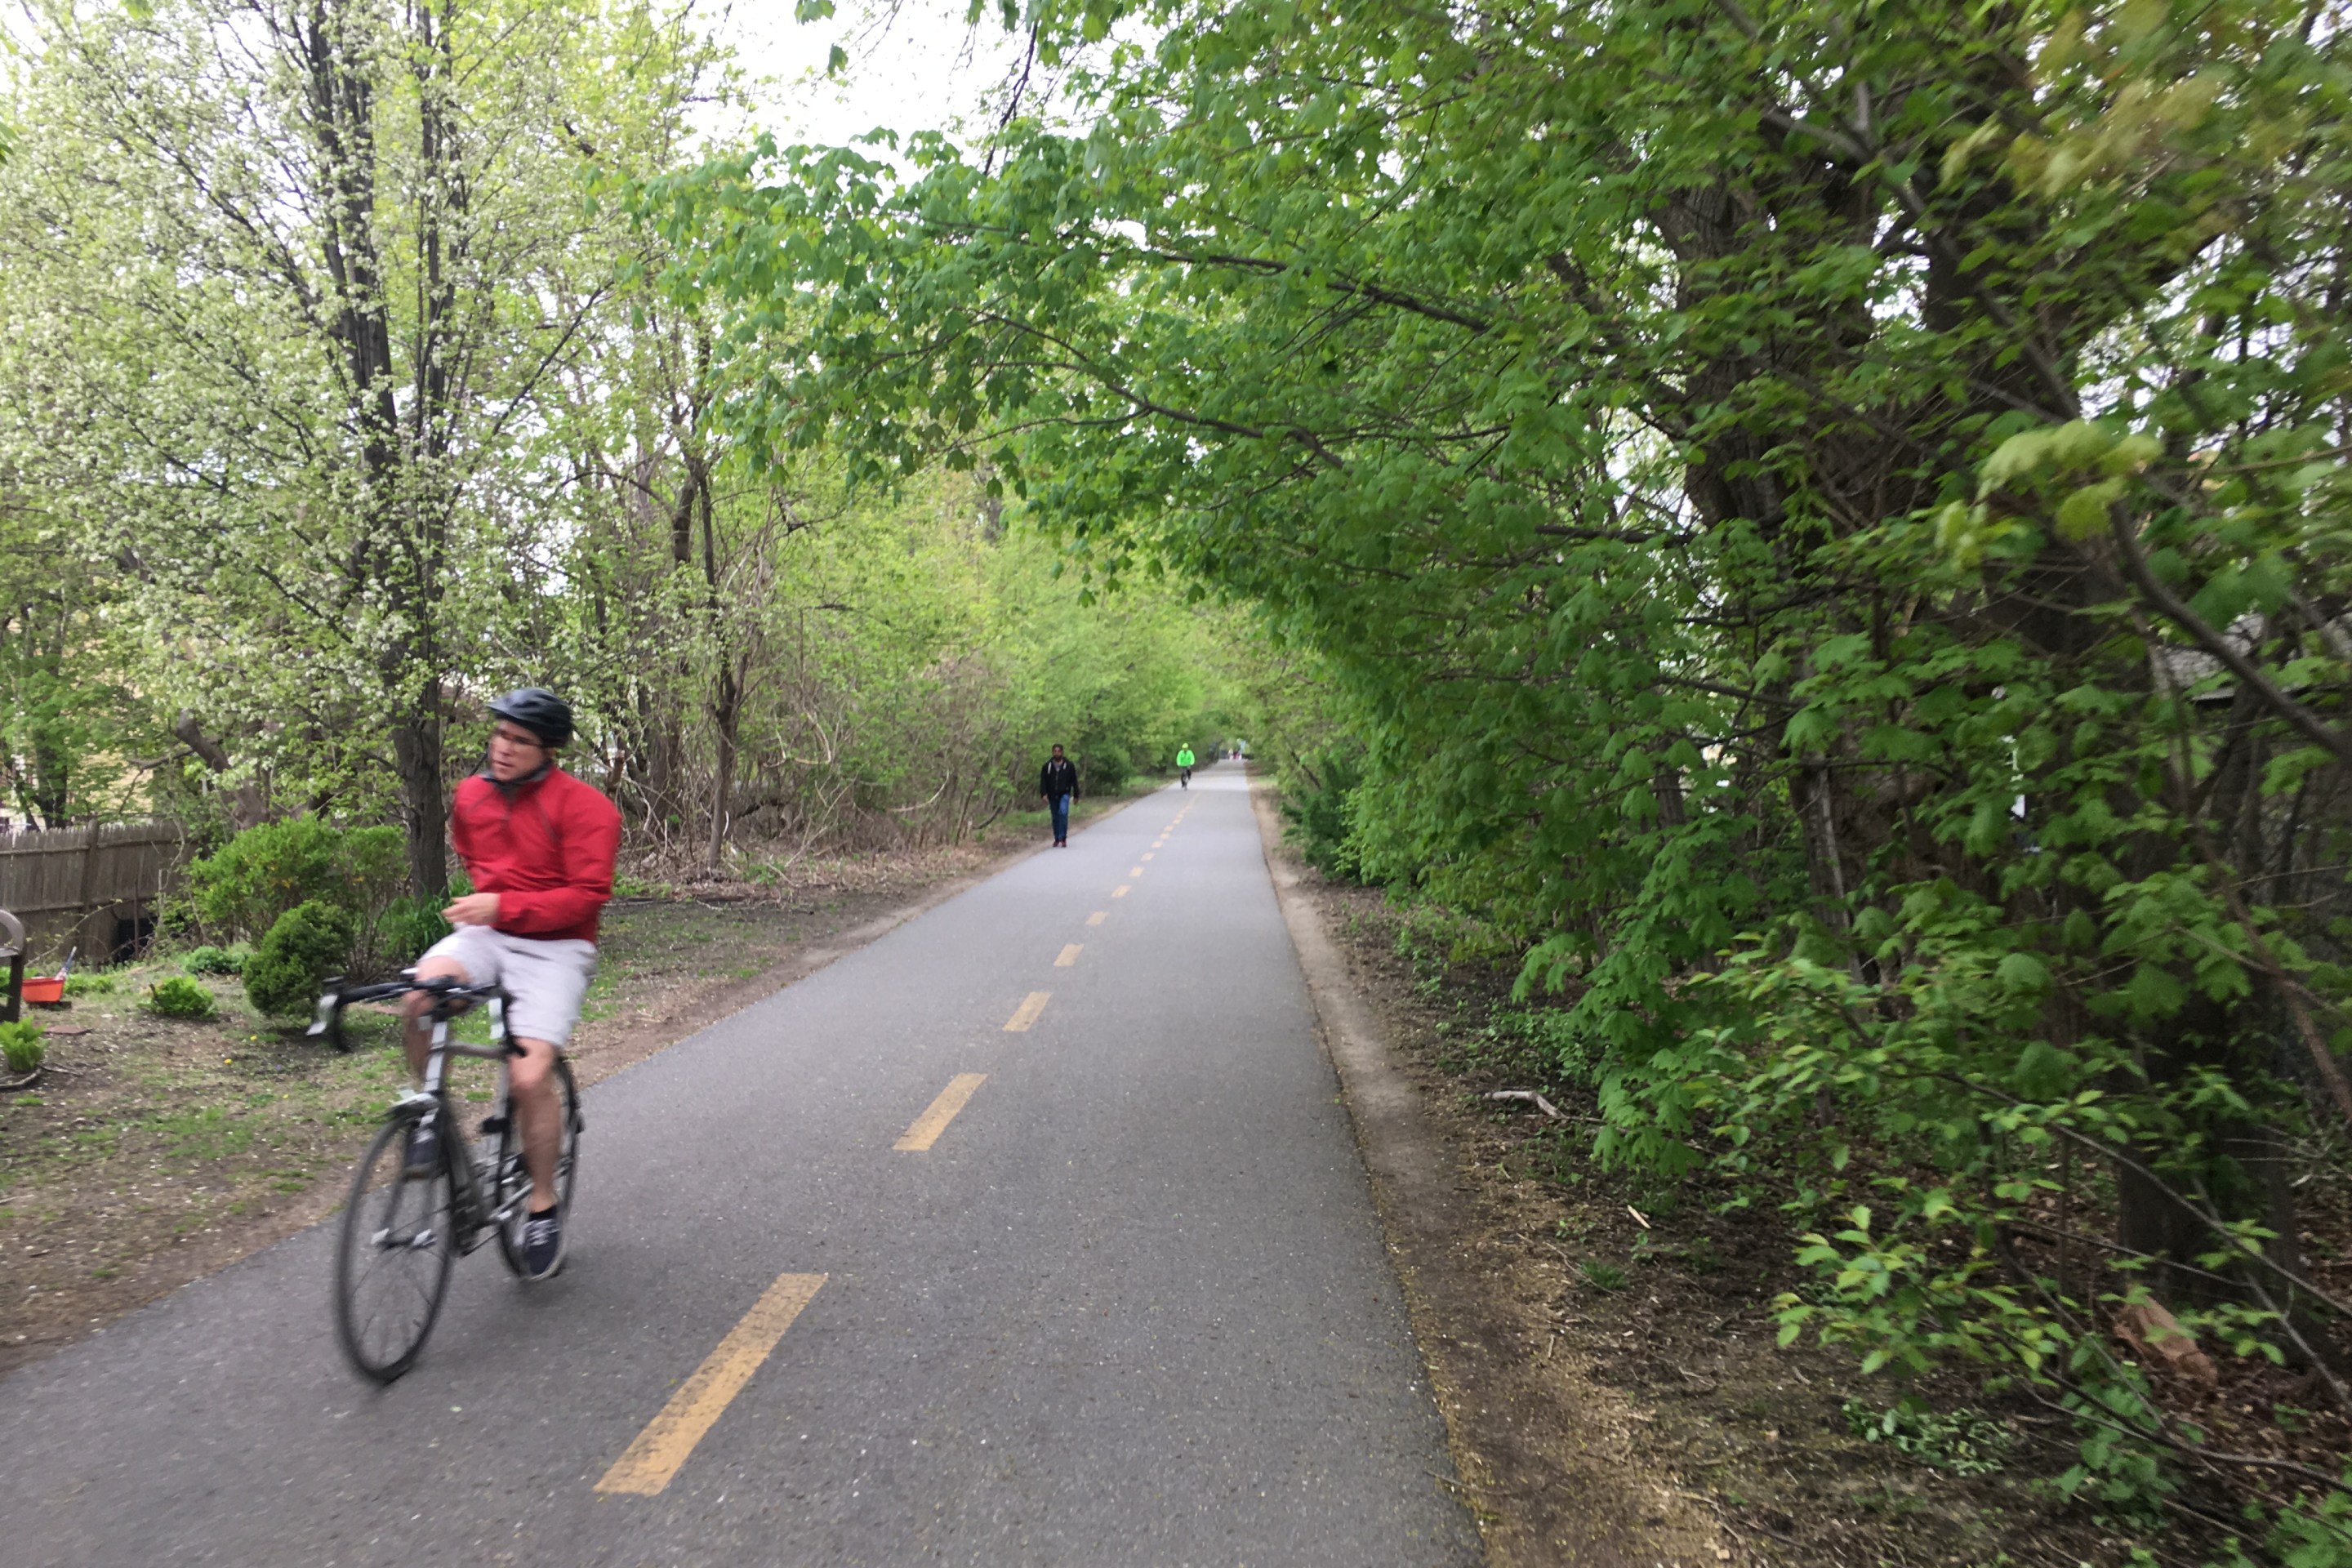 A person rides a bike along the Minuteman path in East Arlington.